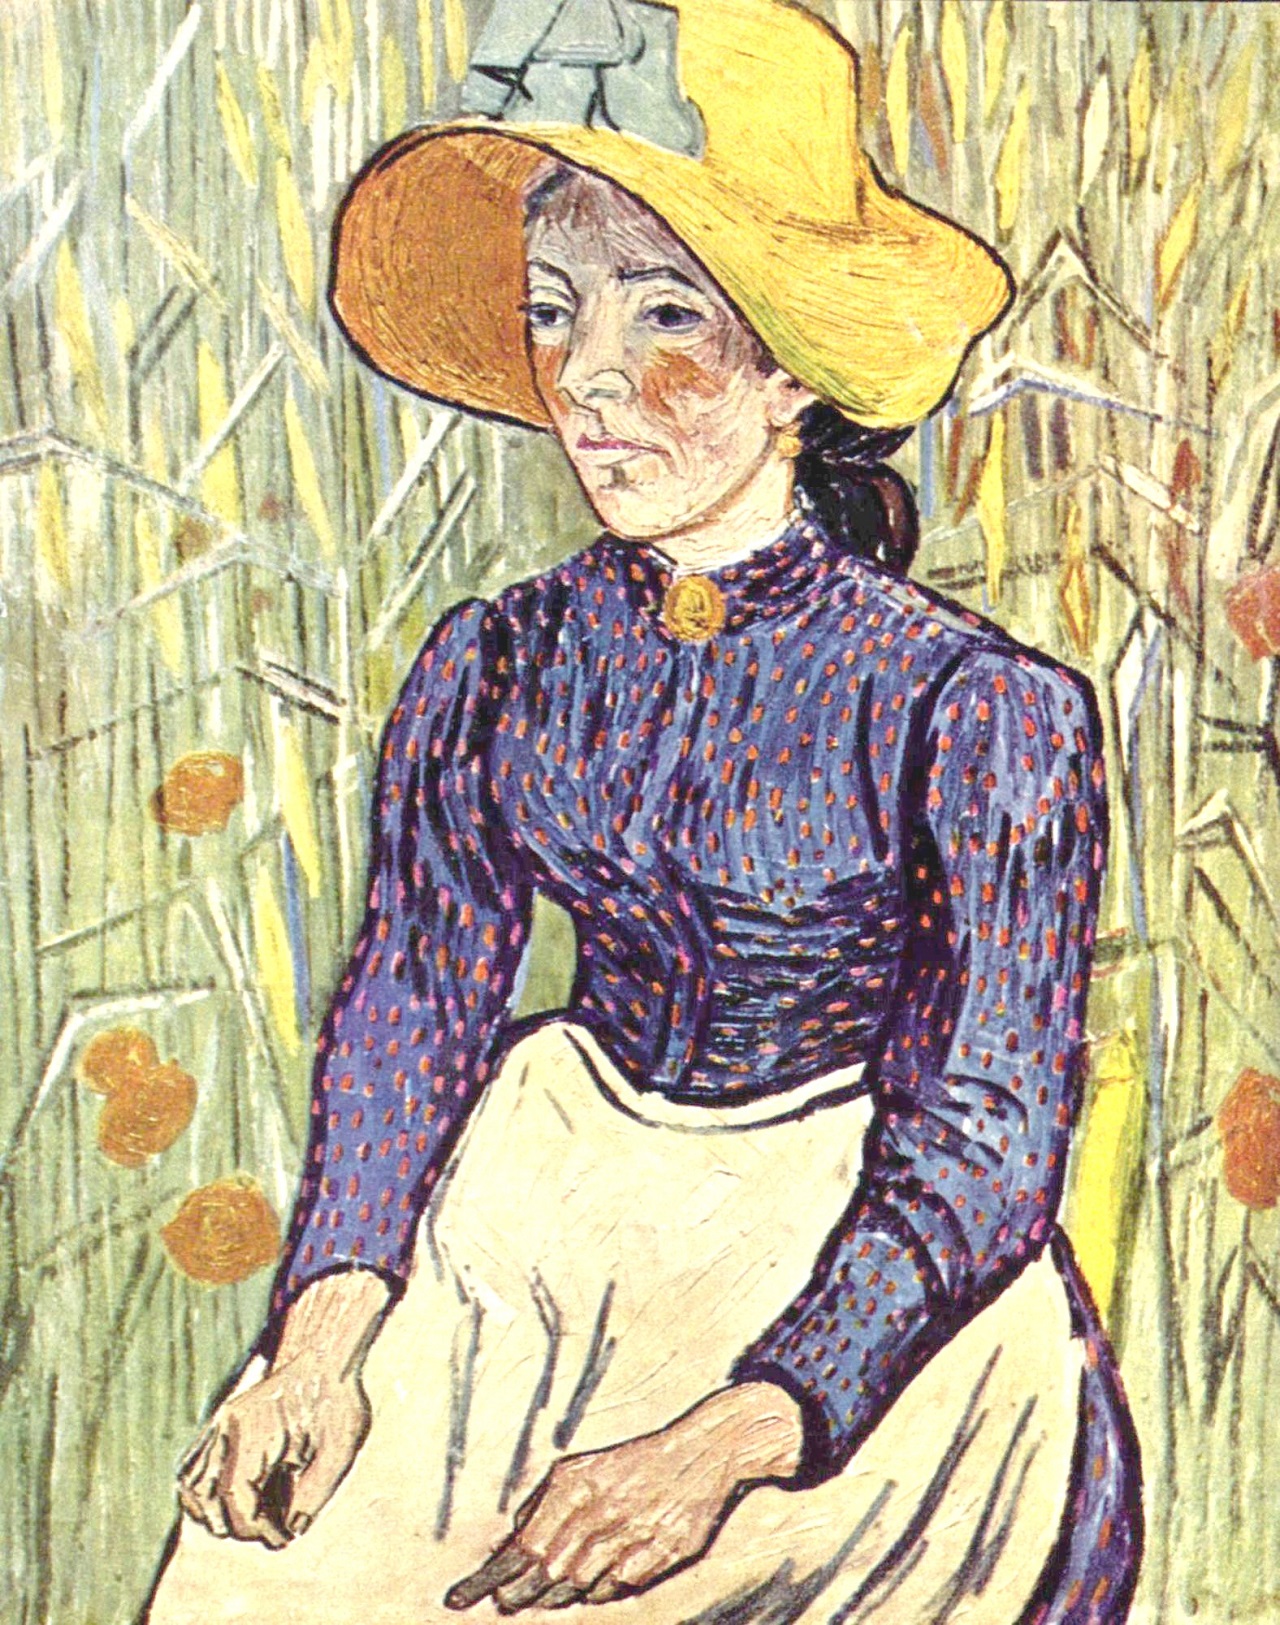 Vincent van Gogh - Peasant Woman Against a Background of Wheat 1890